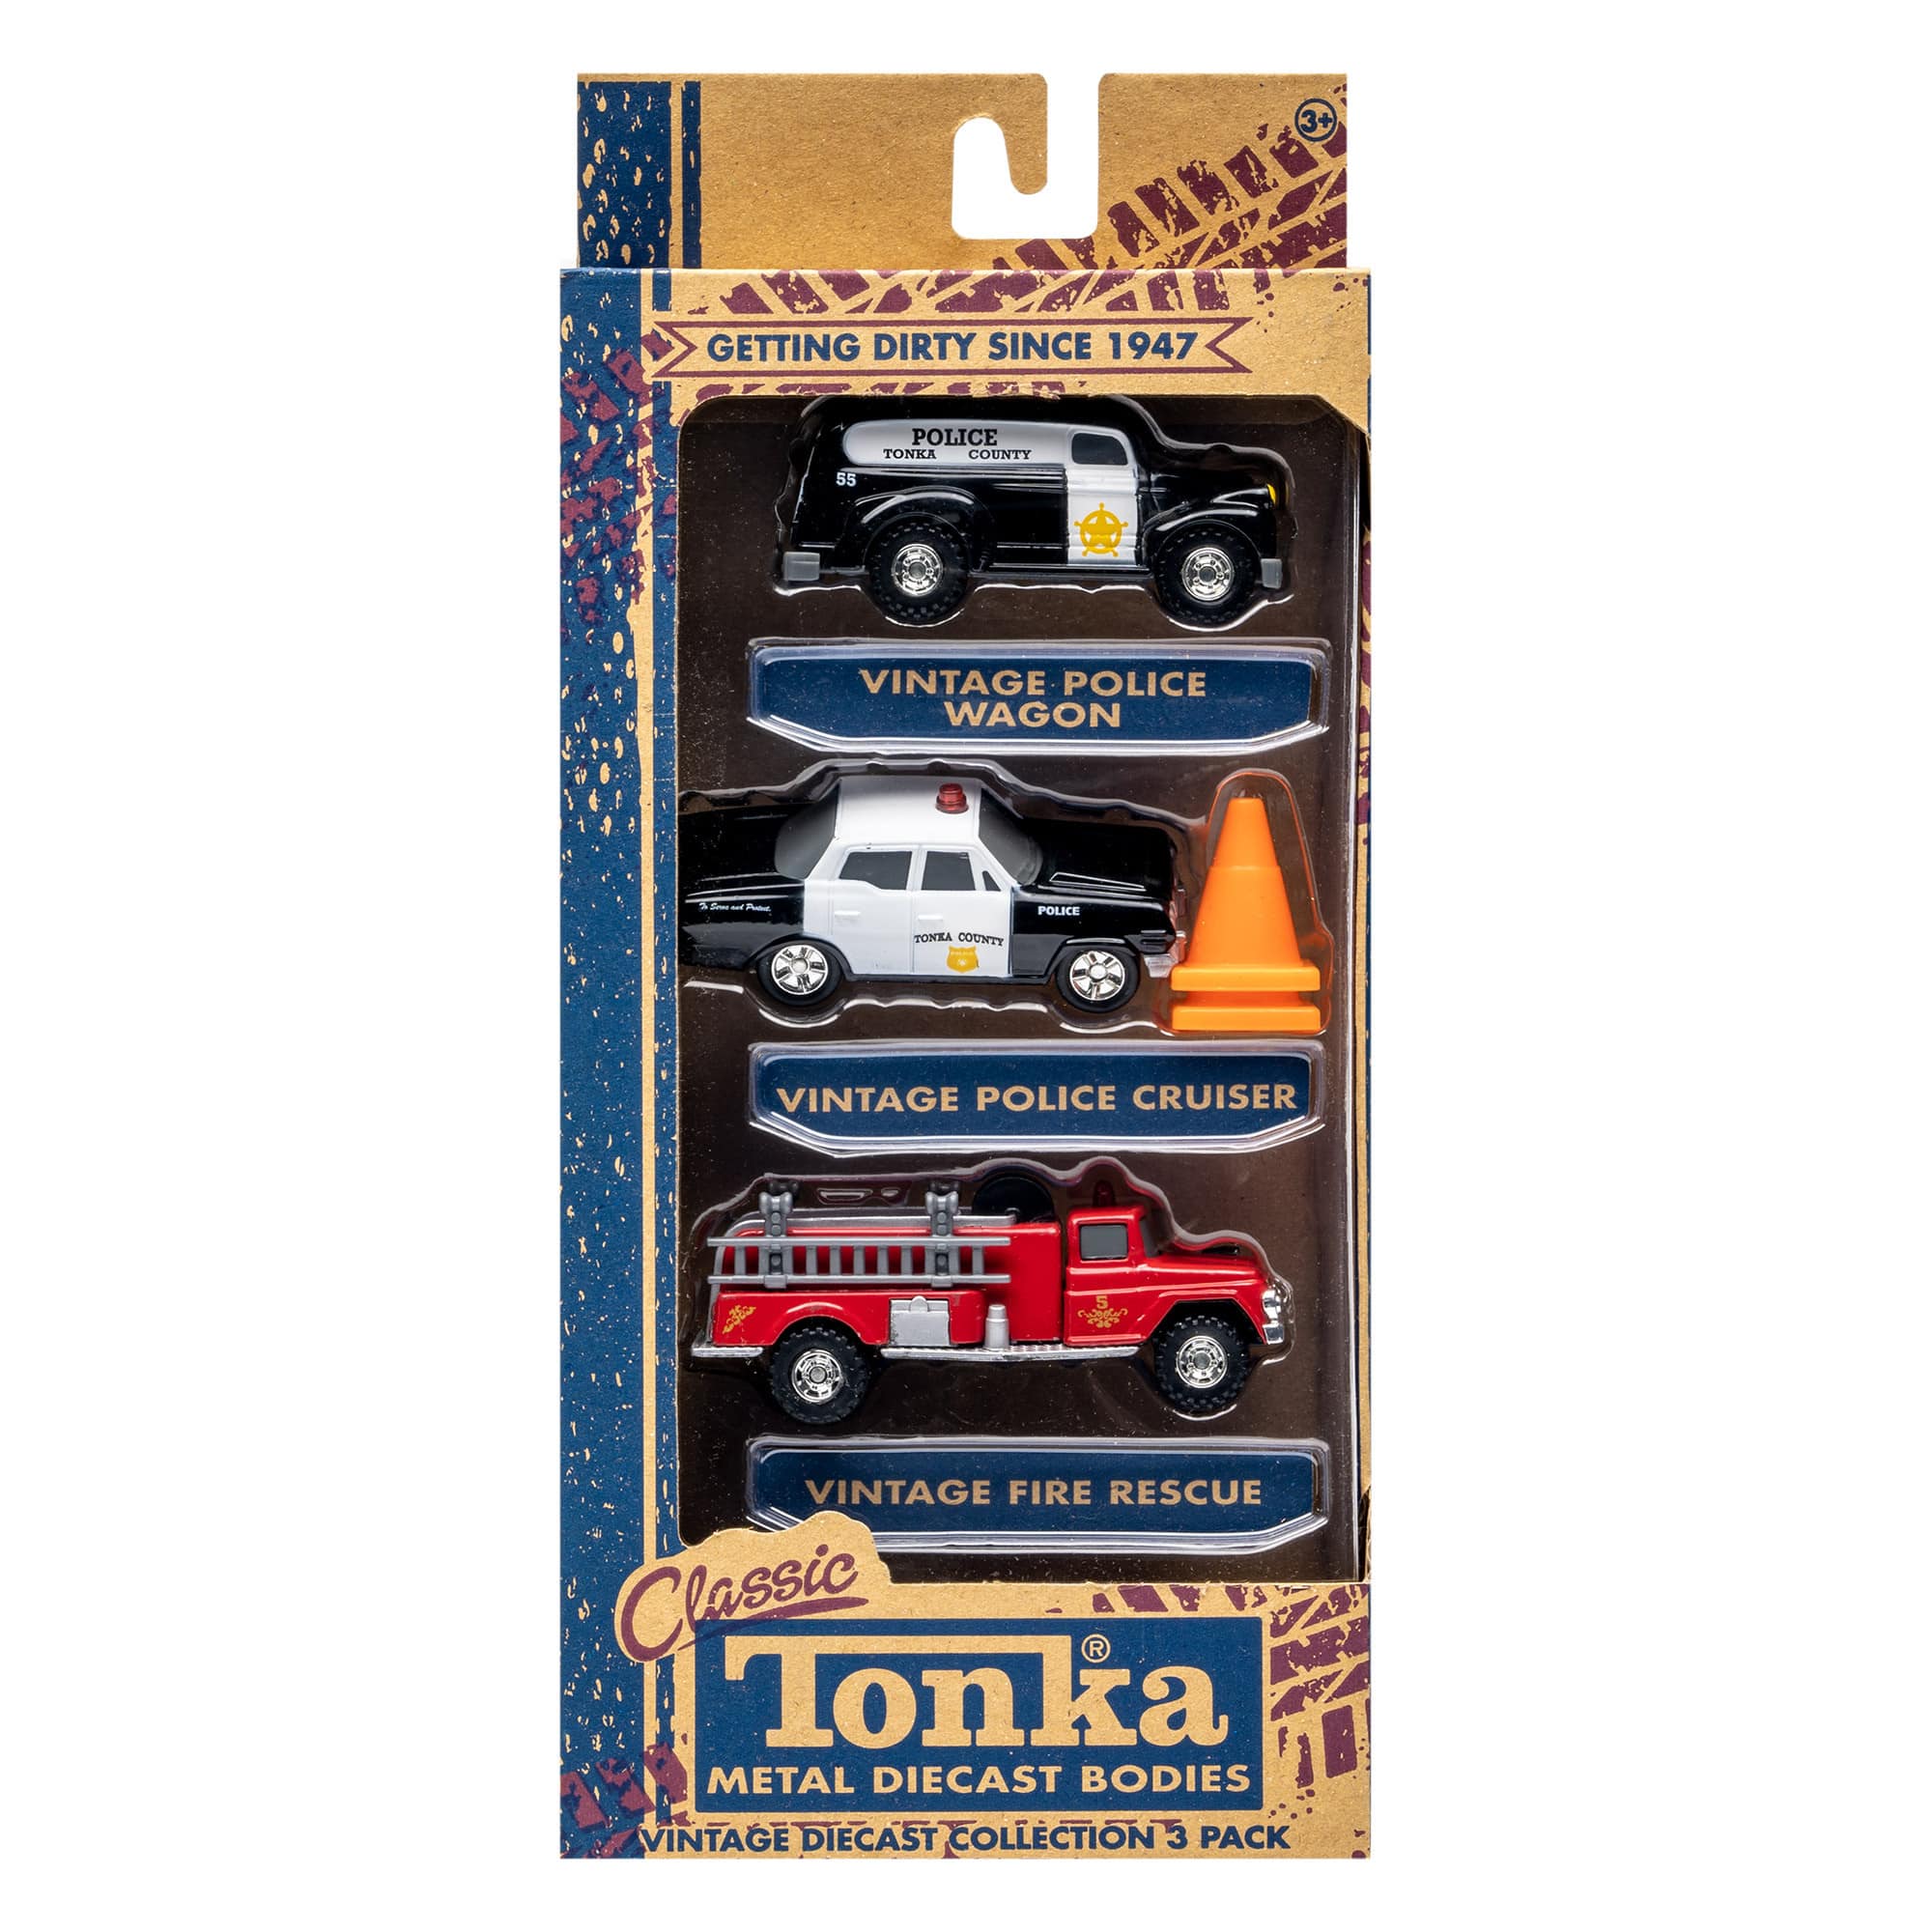 Tonka - Vintage Die-Cast Collection - 3-Pack Assortment B